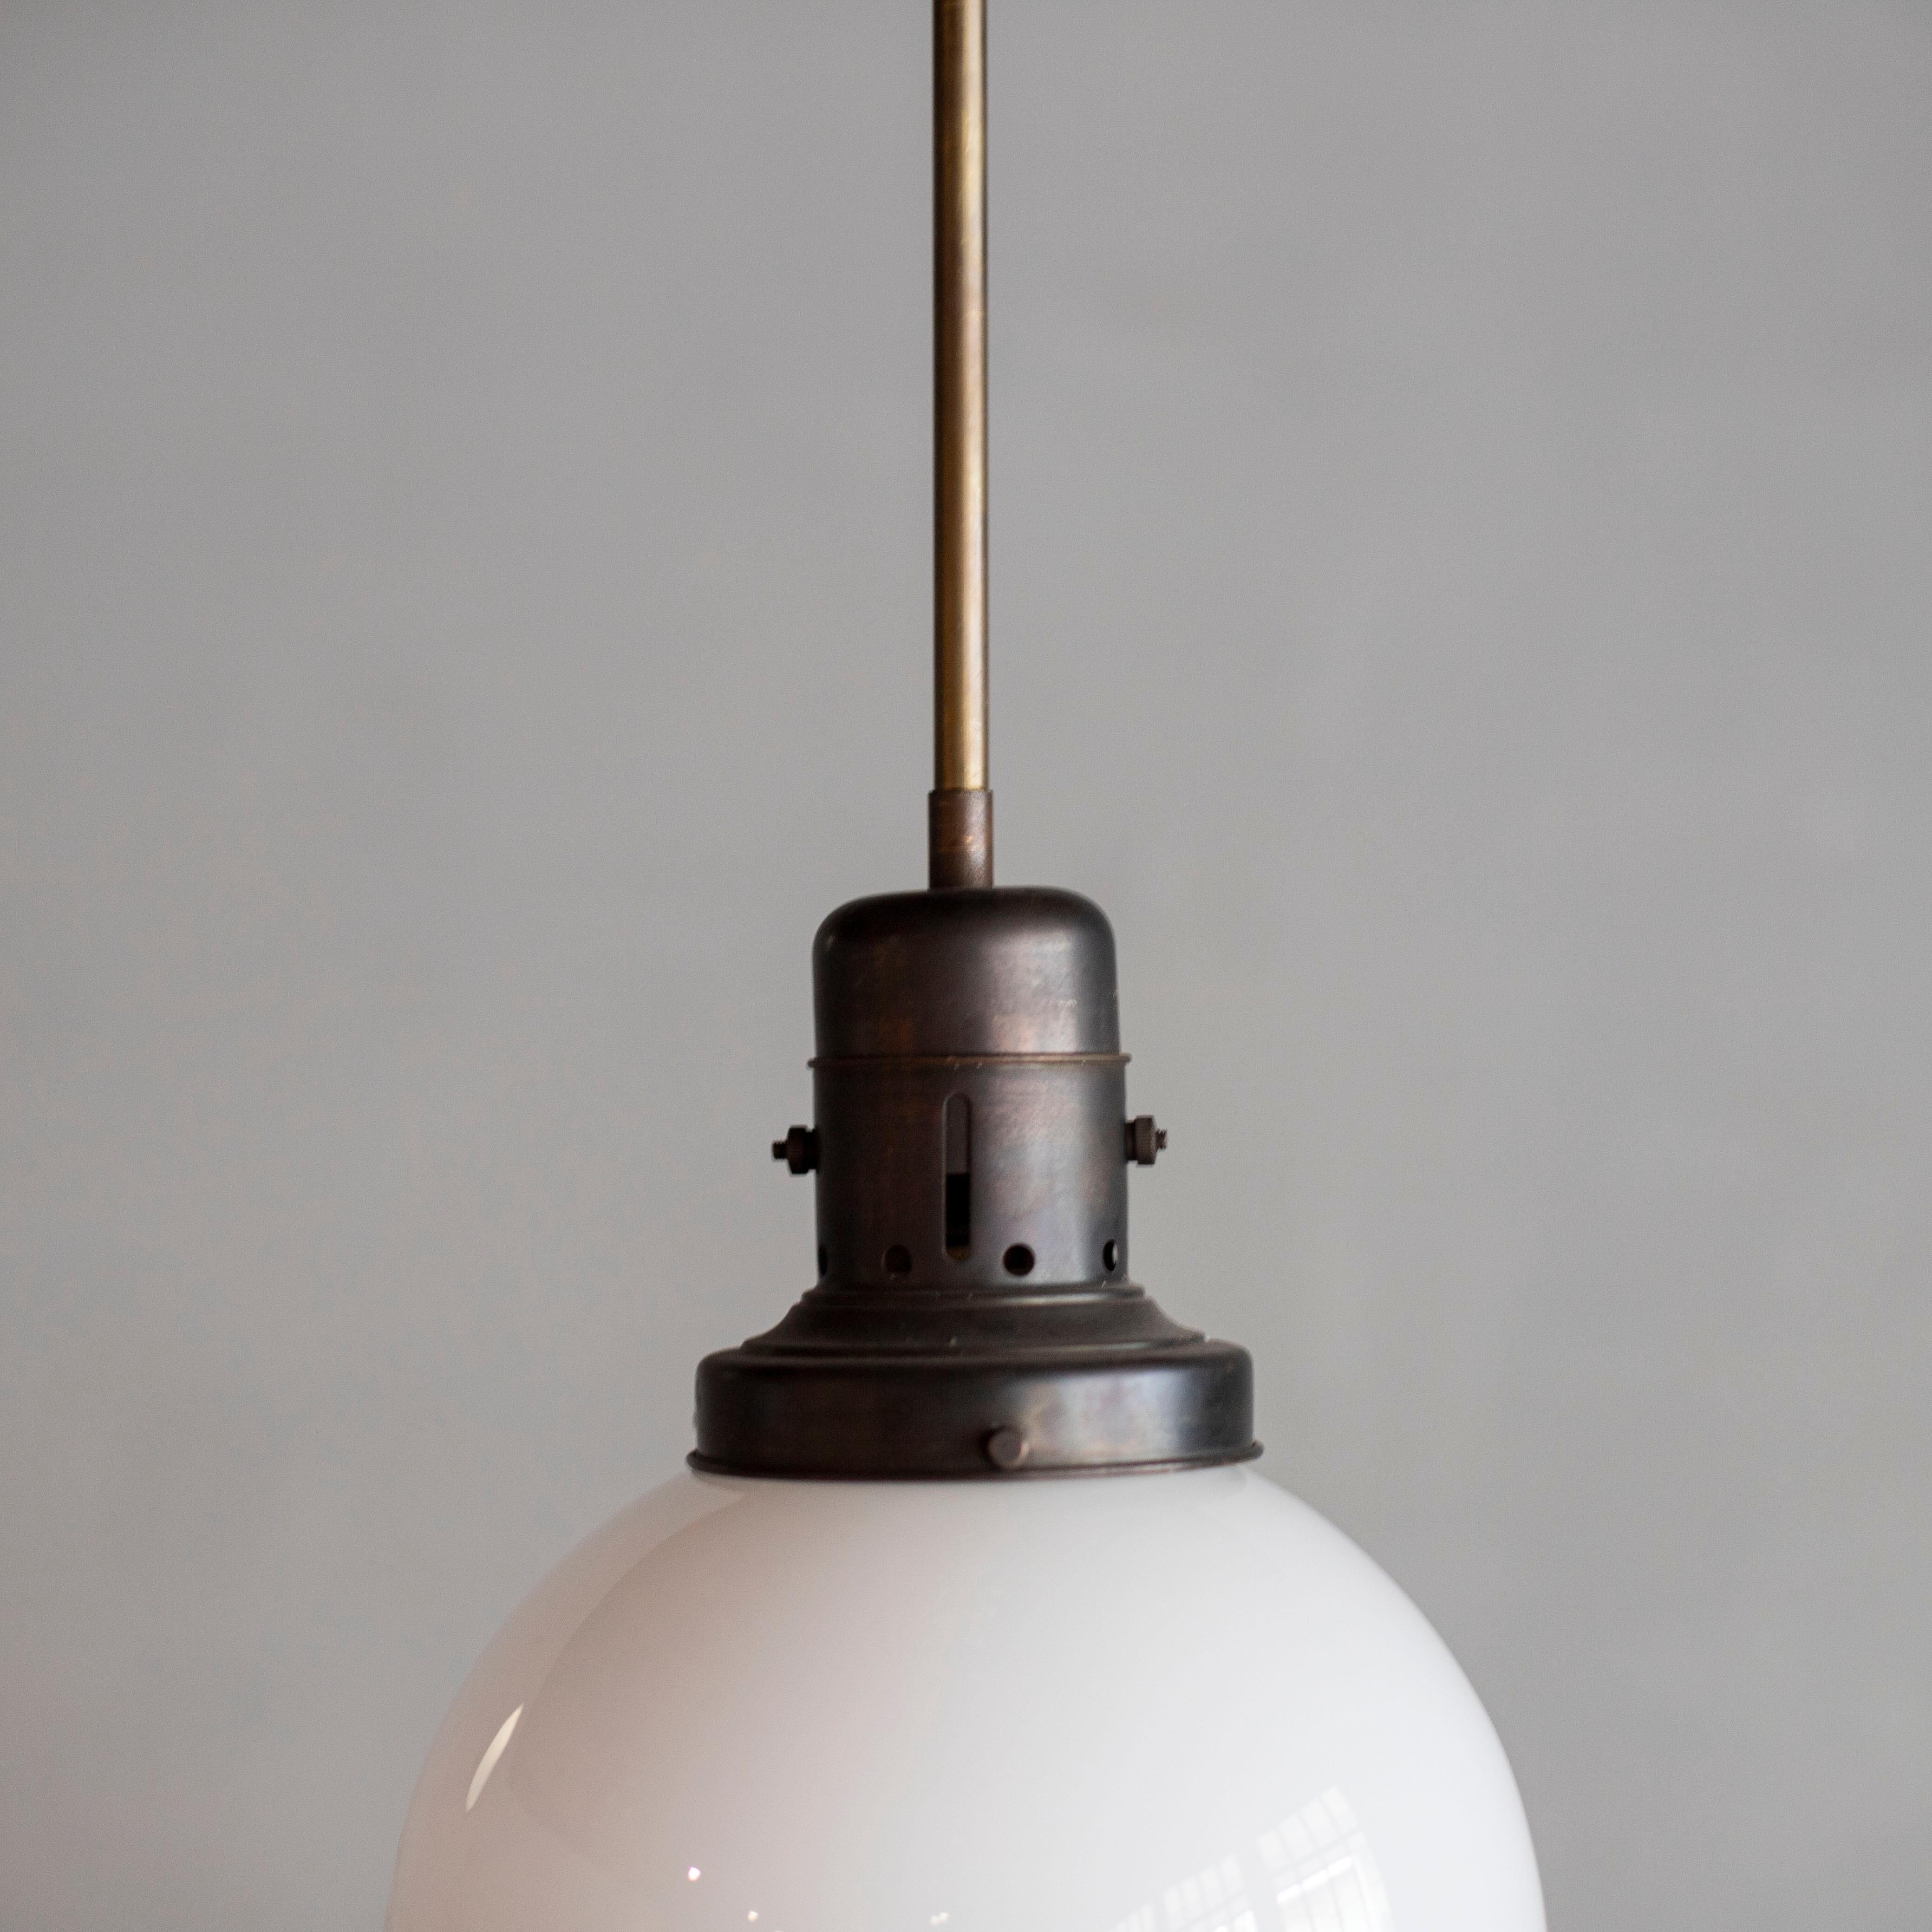 Bauhaus style pendant lamp.
One of kind.
Milk glass and brass.
Made in Italy.
Socket: E26.